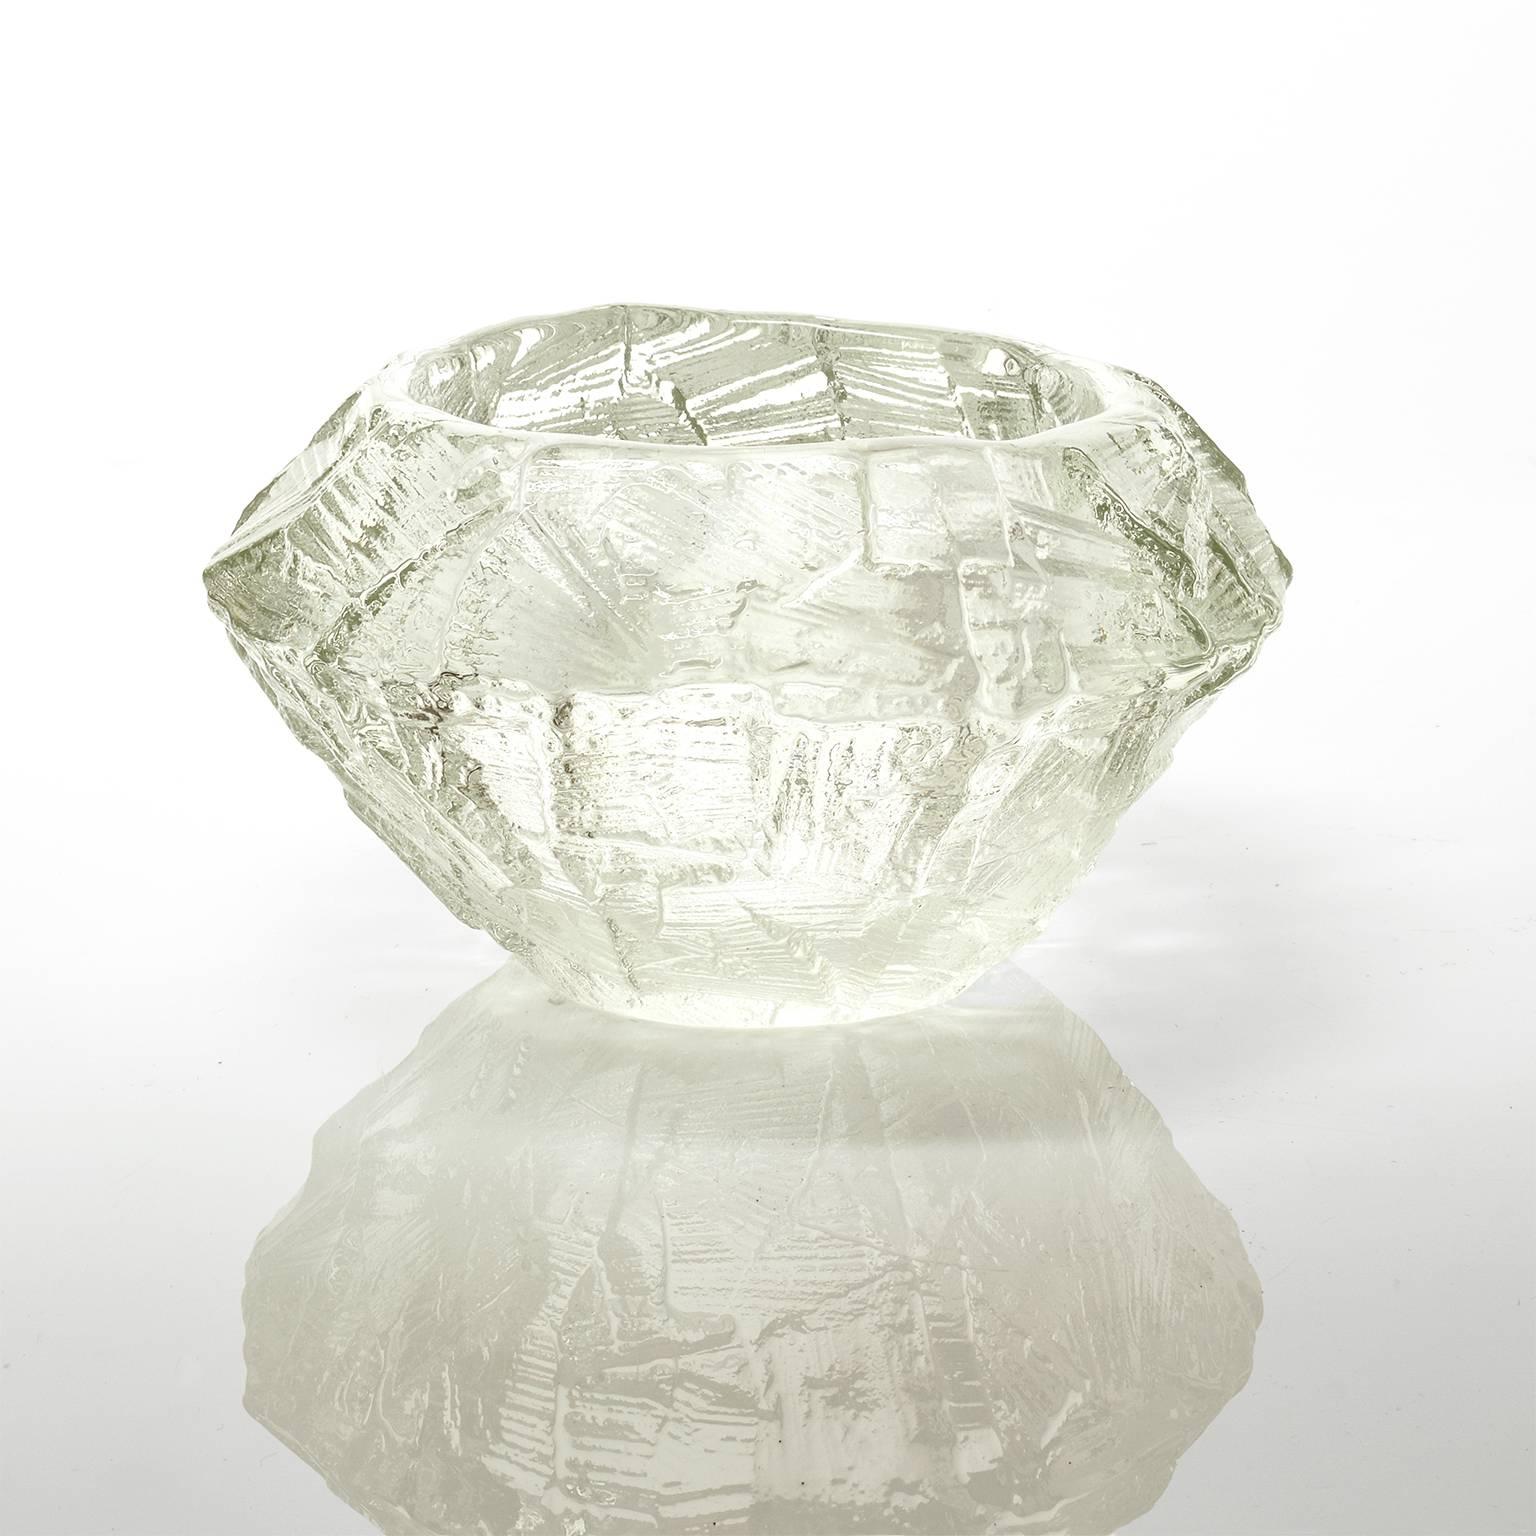 Gore Augustsson for Ruda, Scandinavian Modern Mid-Century Clear Glass Bowl circa 1960s.
 
Measures: Height 5